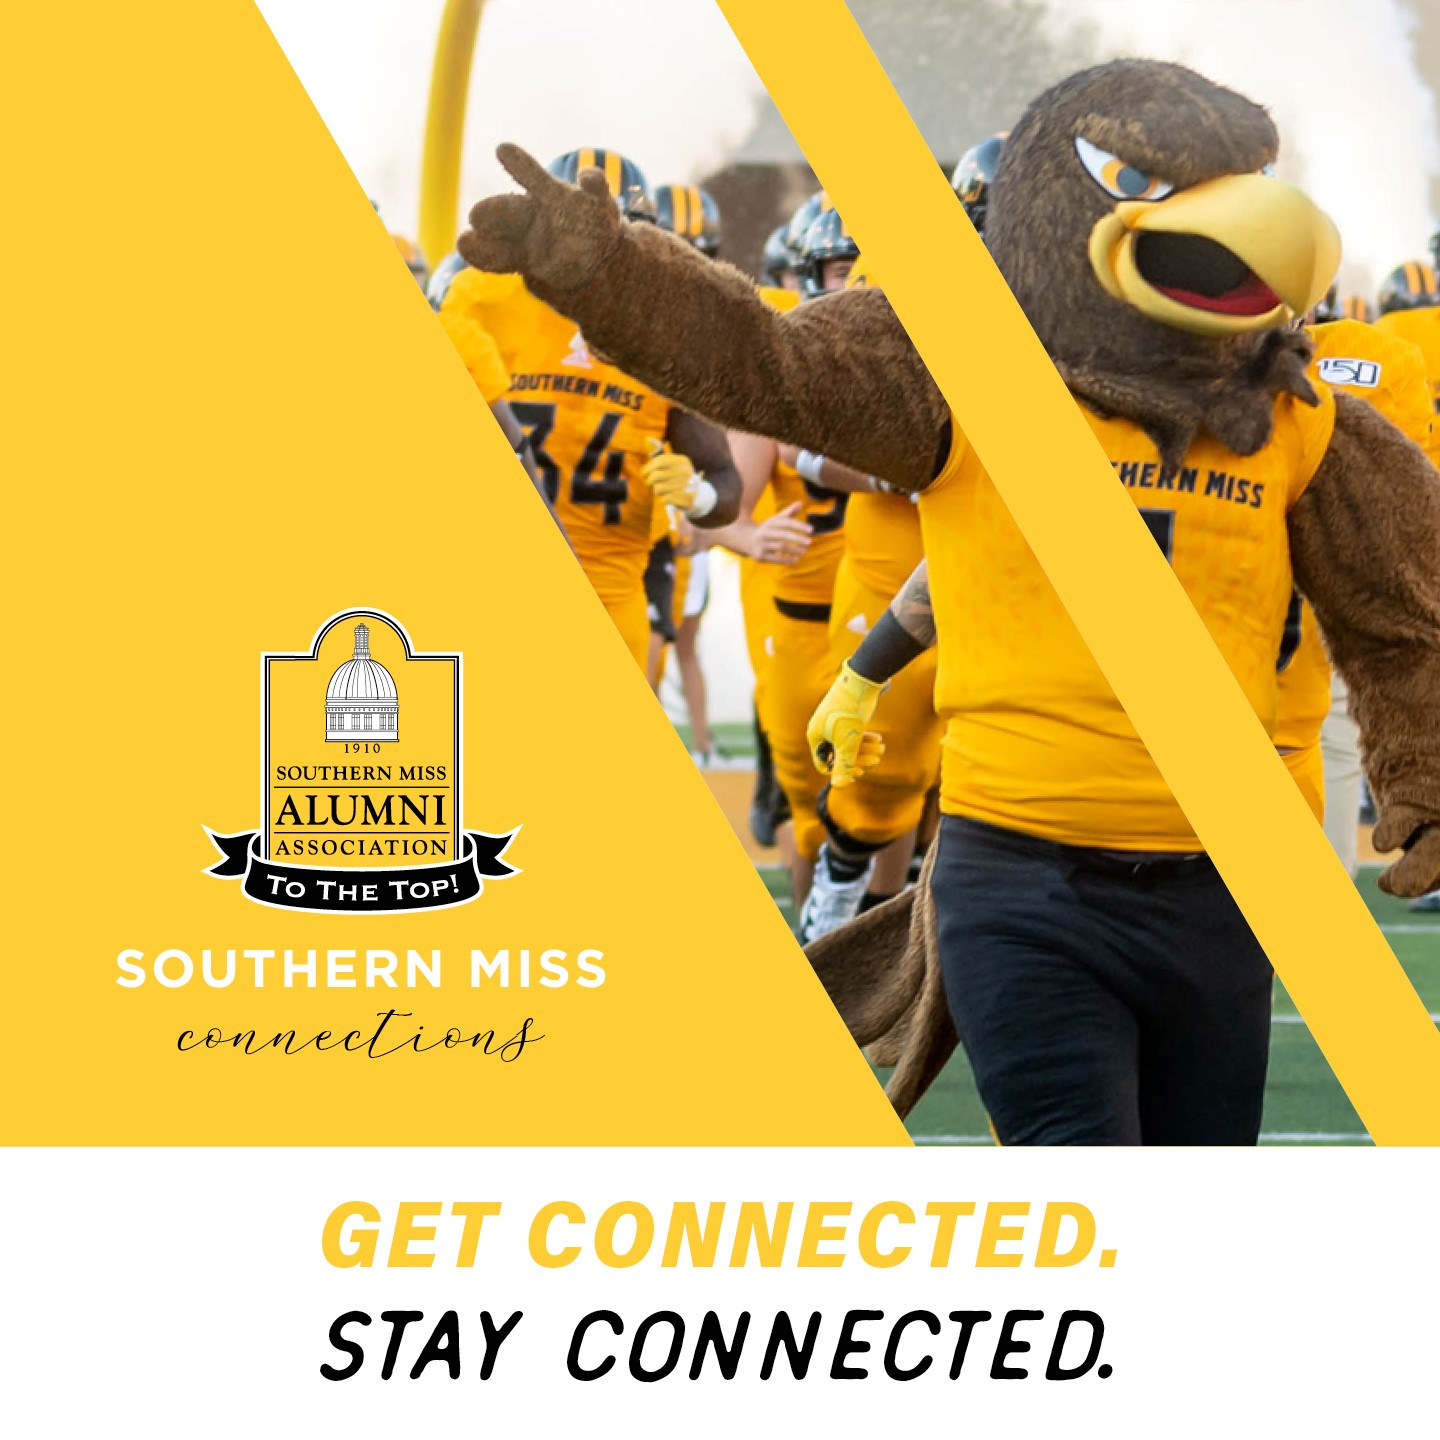 Southern Miss Connections